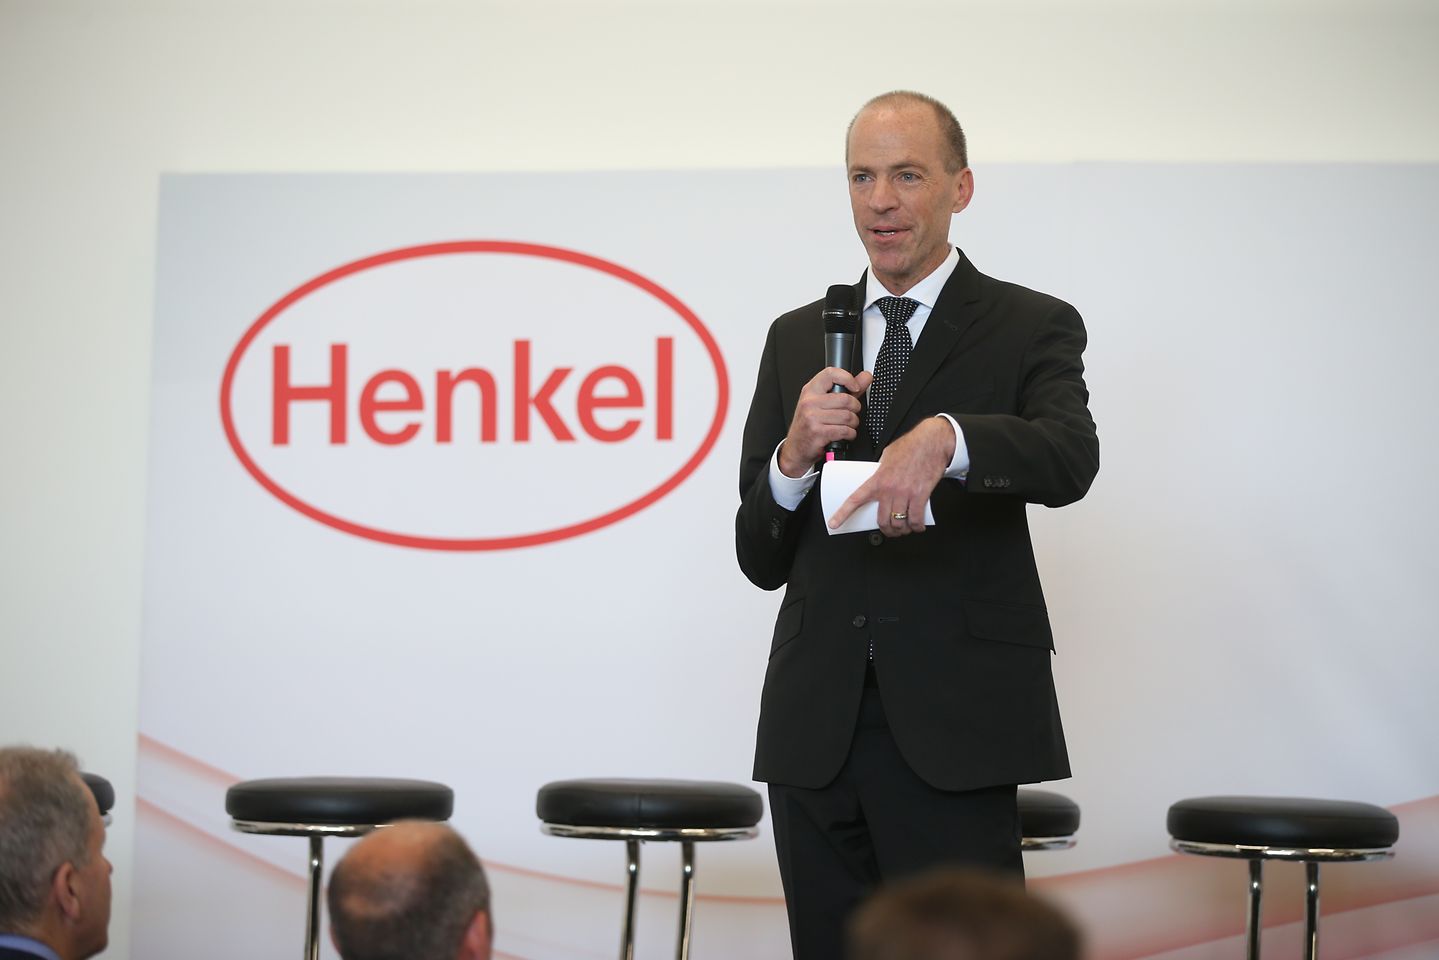 Dr Michael Todd, Global Head of Innovation at Henkel Adhesive Technologies